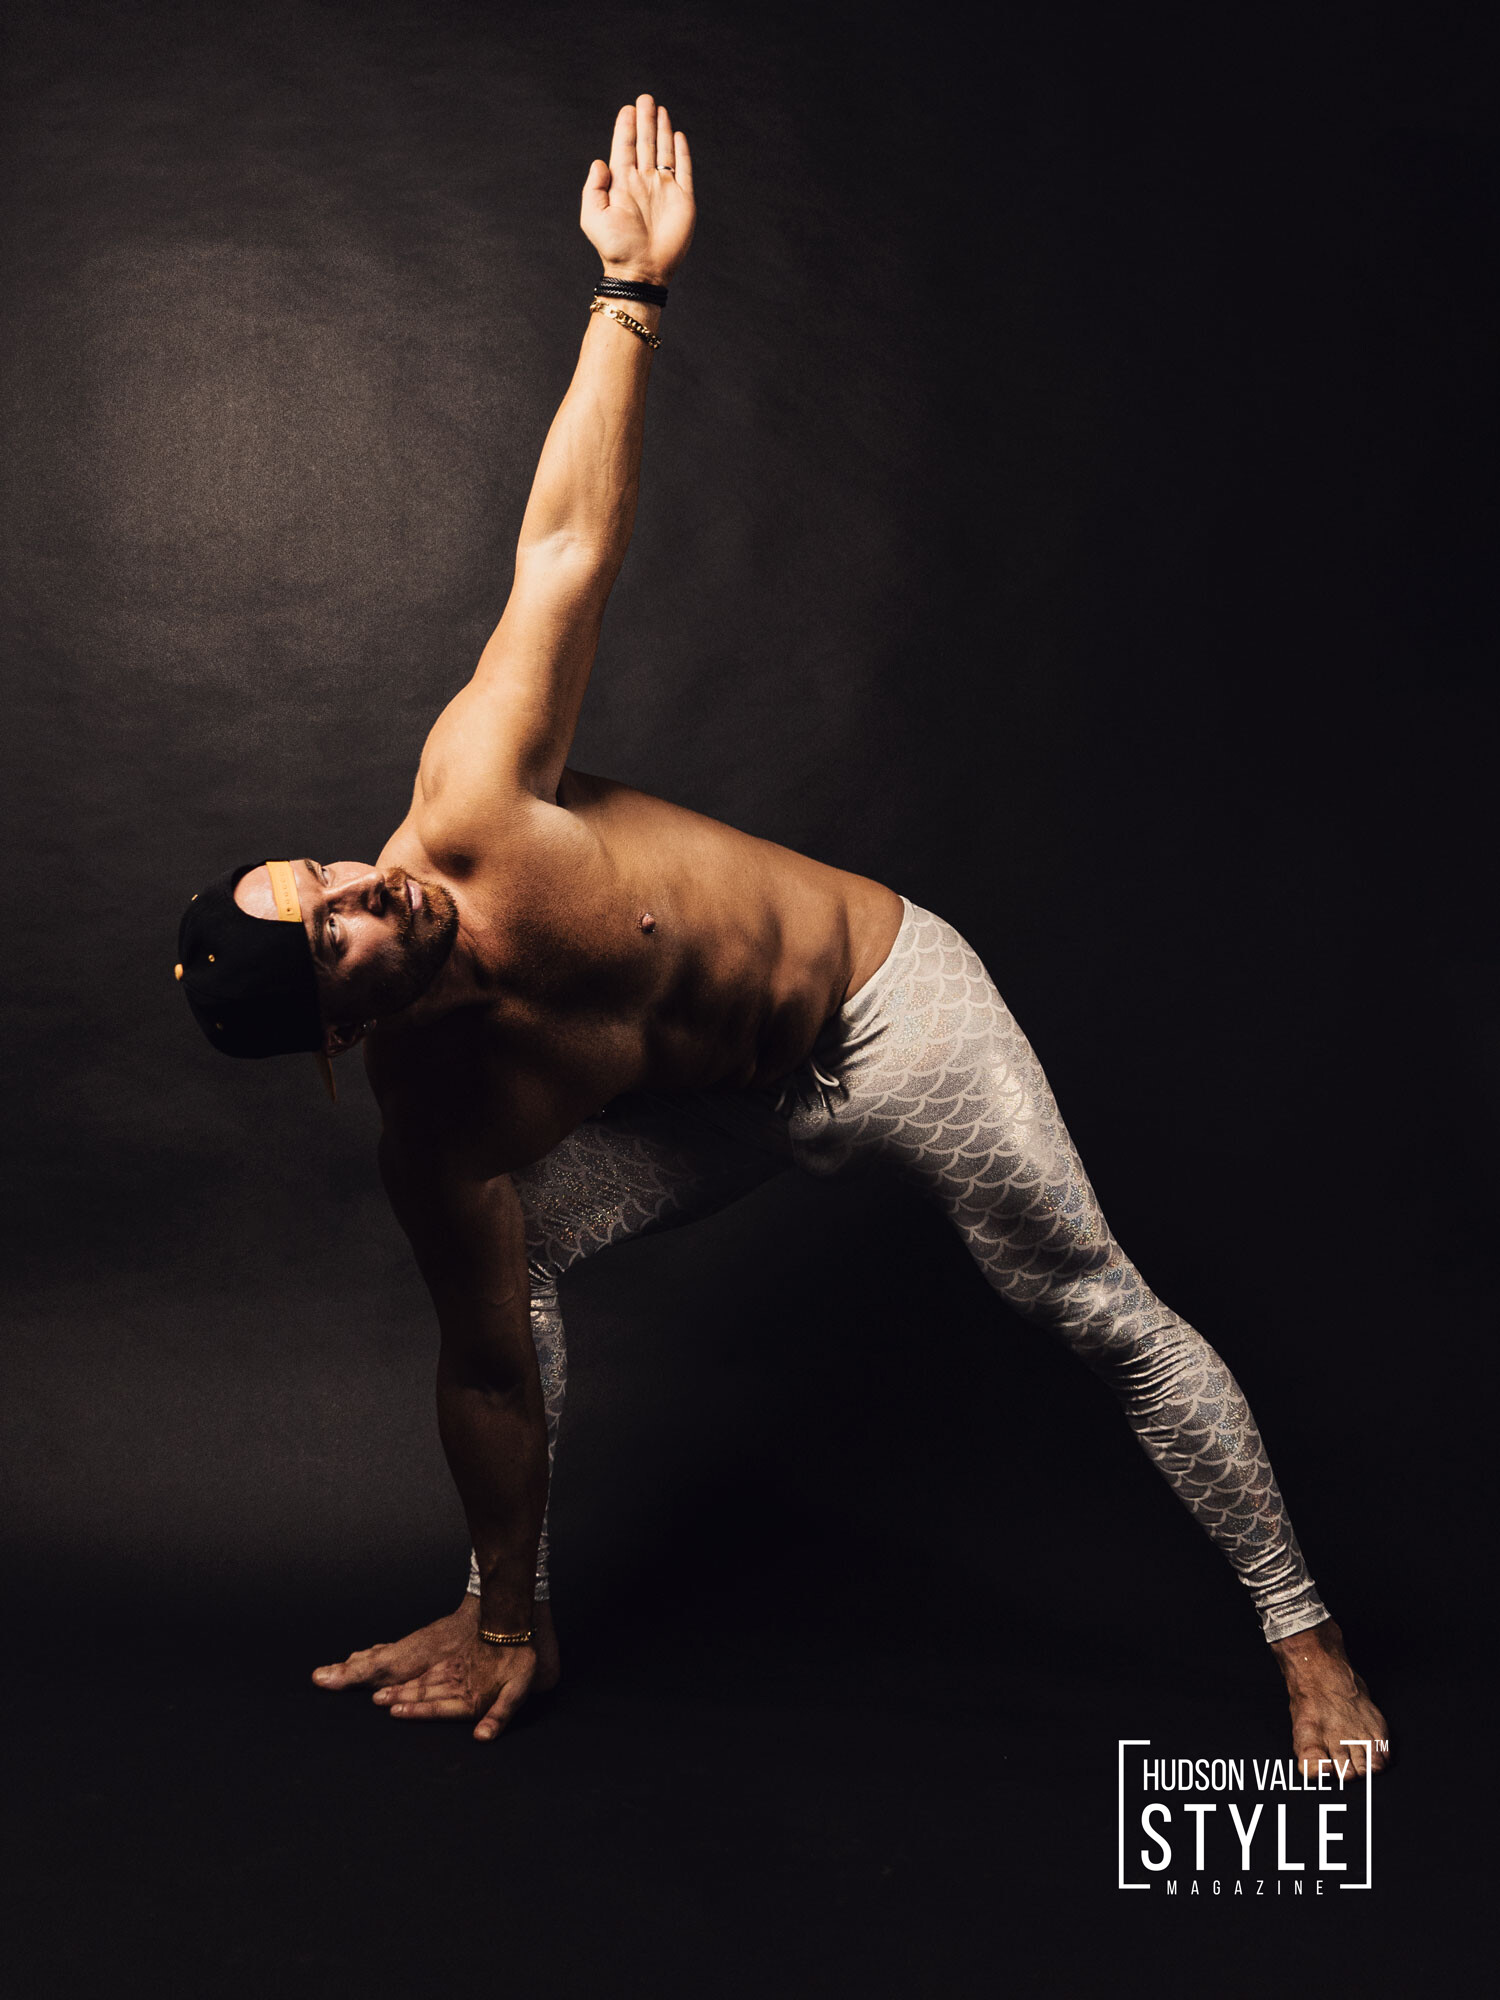 A Crowd Favorite - Hatha Yoga – Yoga 101 with Fitness Trainer, Best Gay OnlyFans Fitness Model and Creator Maxwell Alexander – Photography by Duncan Avenue Studios – Presented by "Introduction to Yoga and Meditation" Book by Maxwell Alexander